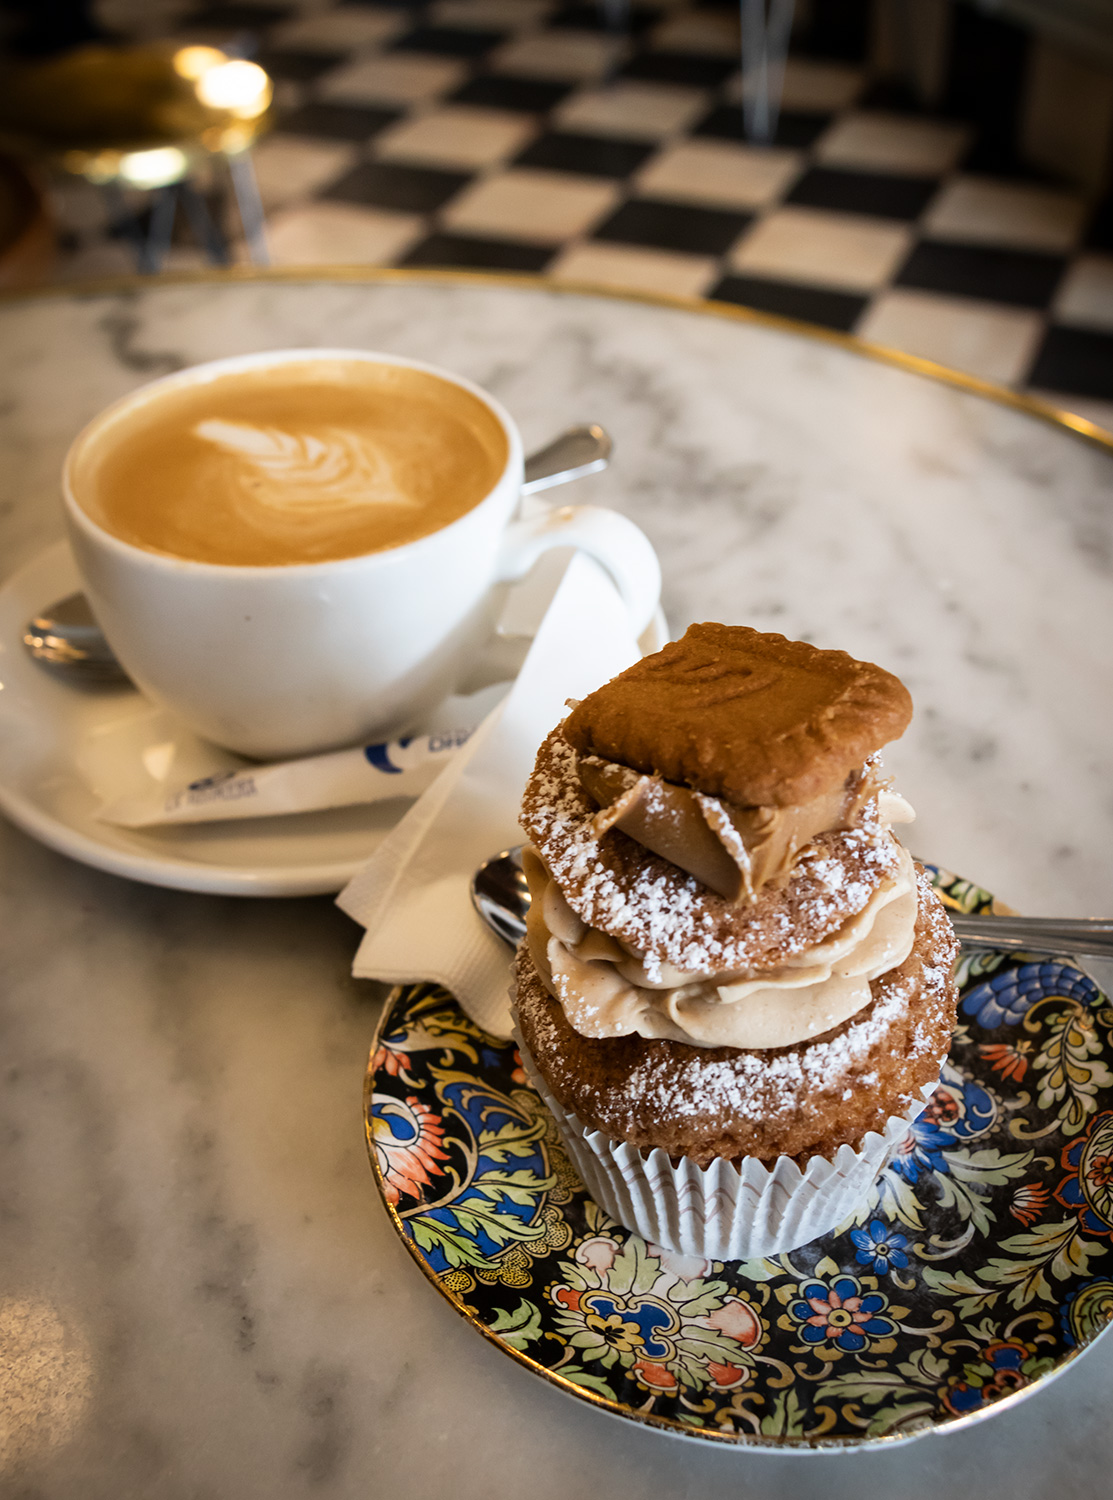 Treat your sweet tooth to cakes at El Tilo de Mami Lou in Bilbao.